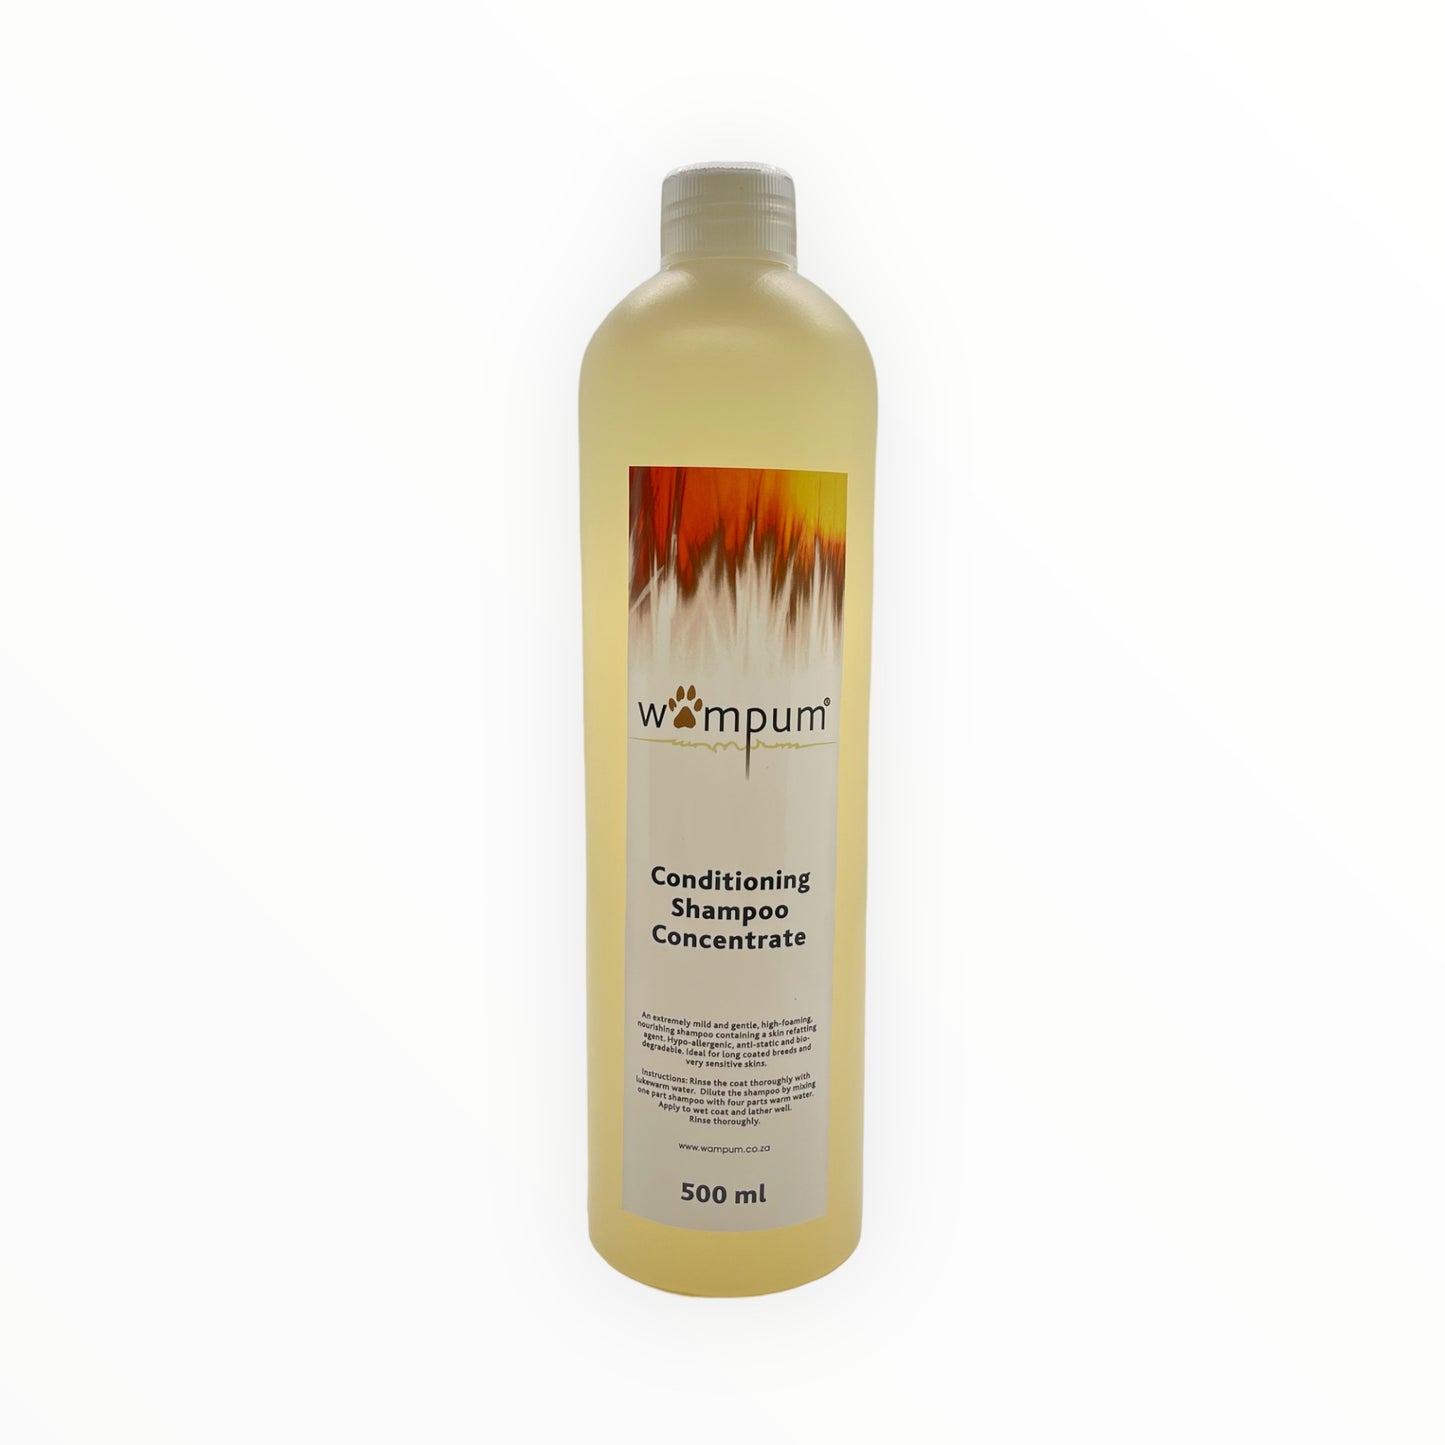 Wampum Conditioning Shampoo Concentrate 500ml